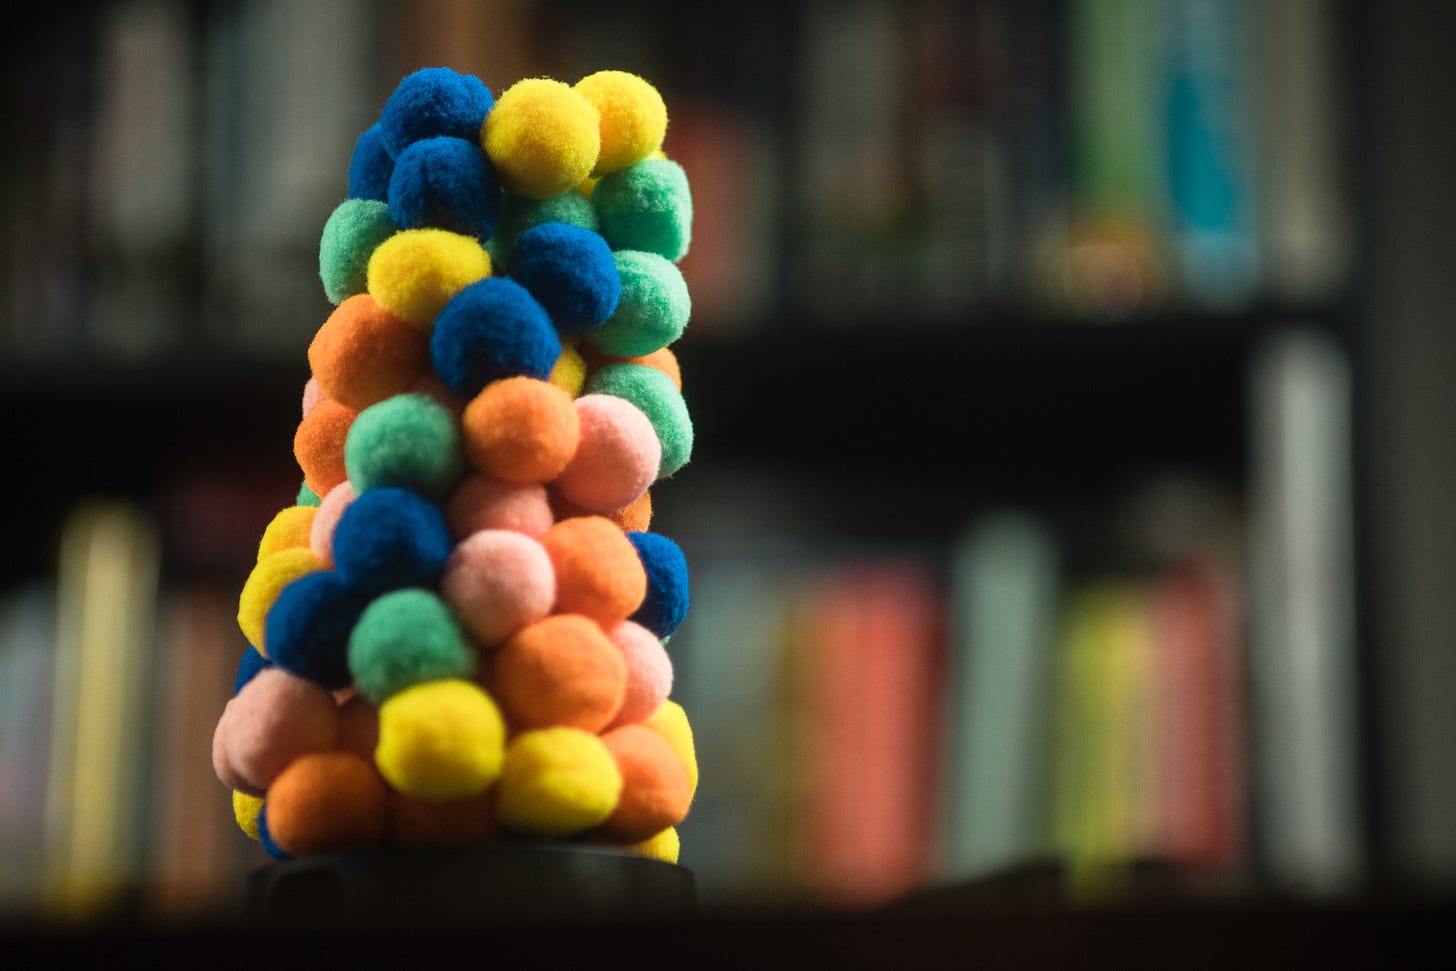 A tower of fuzz balls that comprise The Fuzzies with a bookshelf out of focus behind. The tower is leaning slightly.